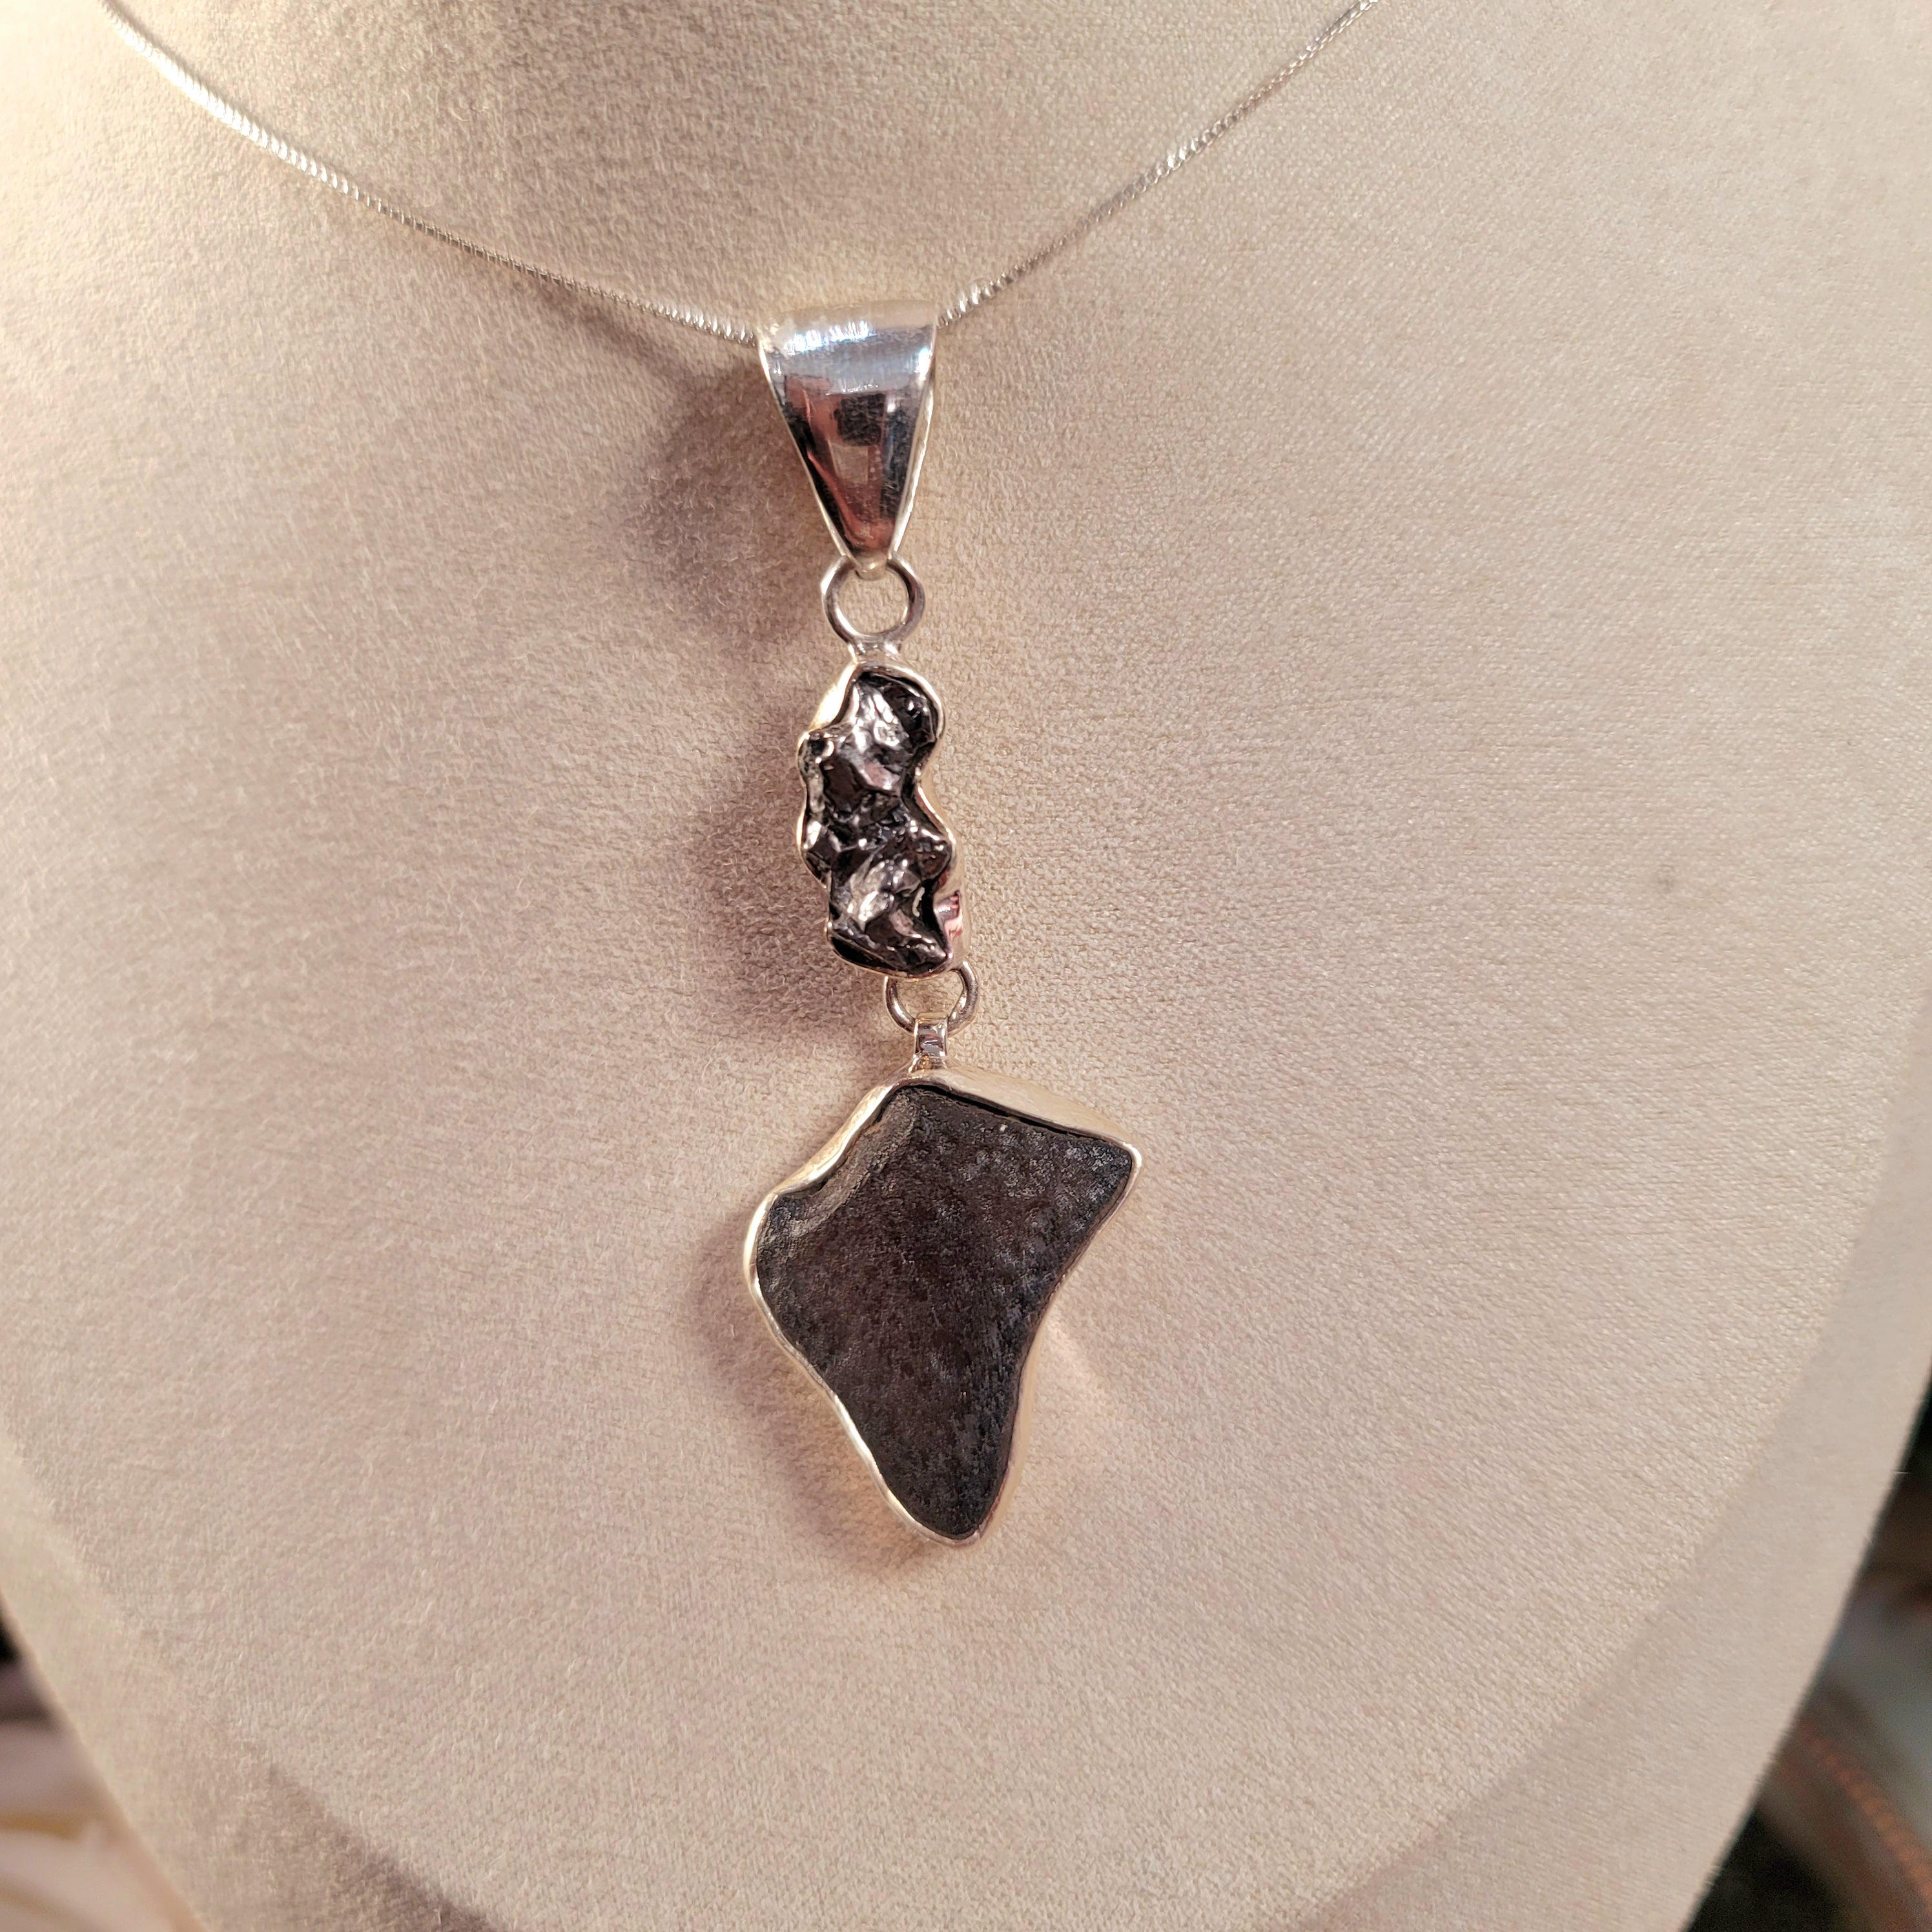 Meteorite & Colombianite Necklace for Enhancing your Life Force Energy